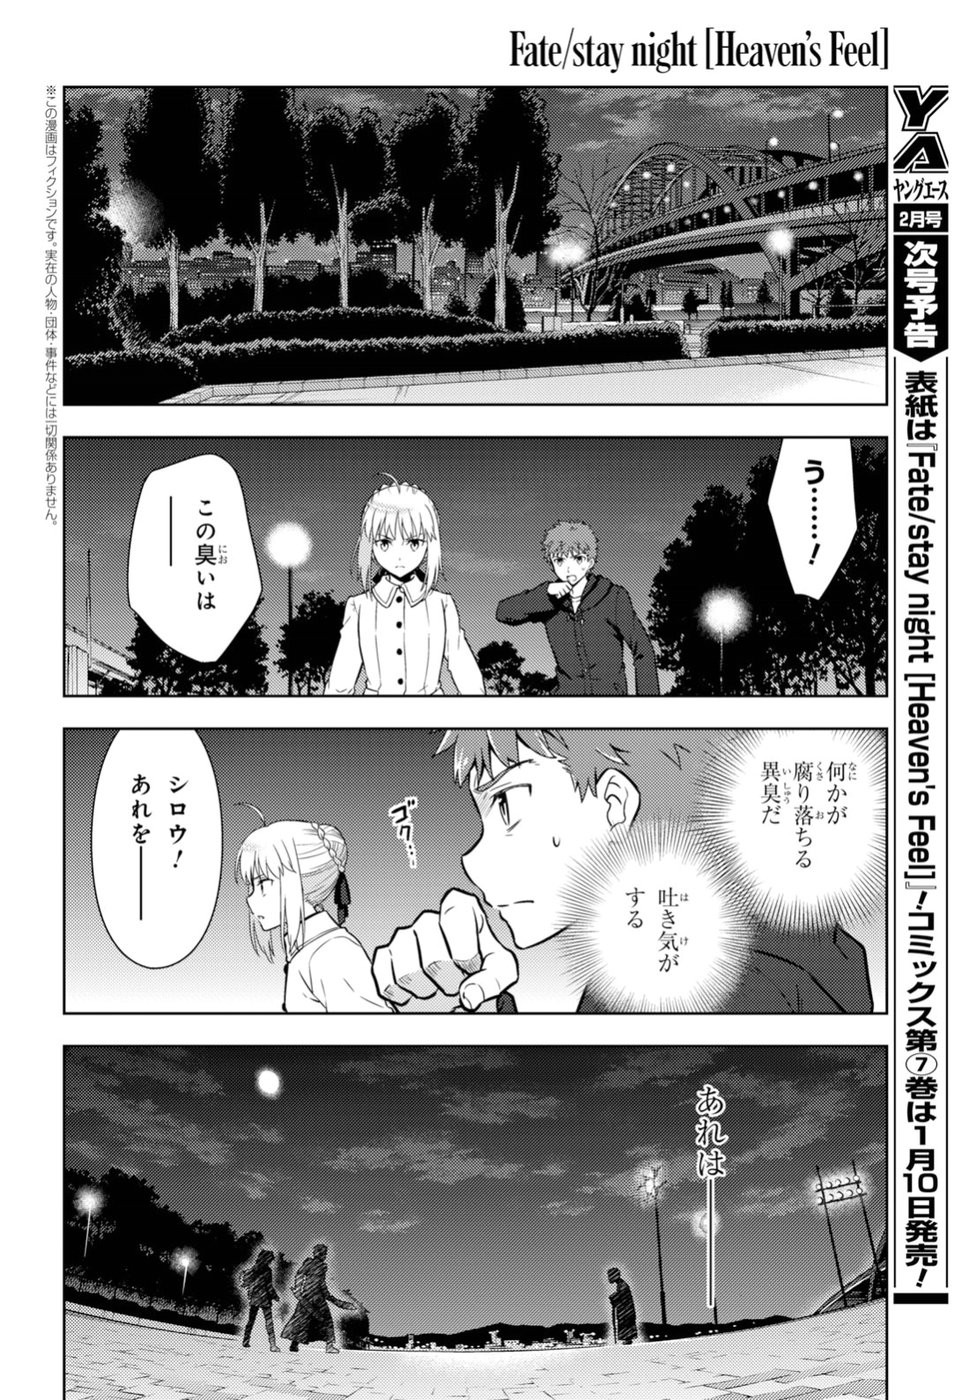 Fate/Stay night Heaven's Feel - Chapter 44 - Page 2